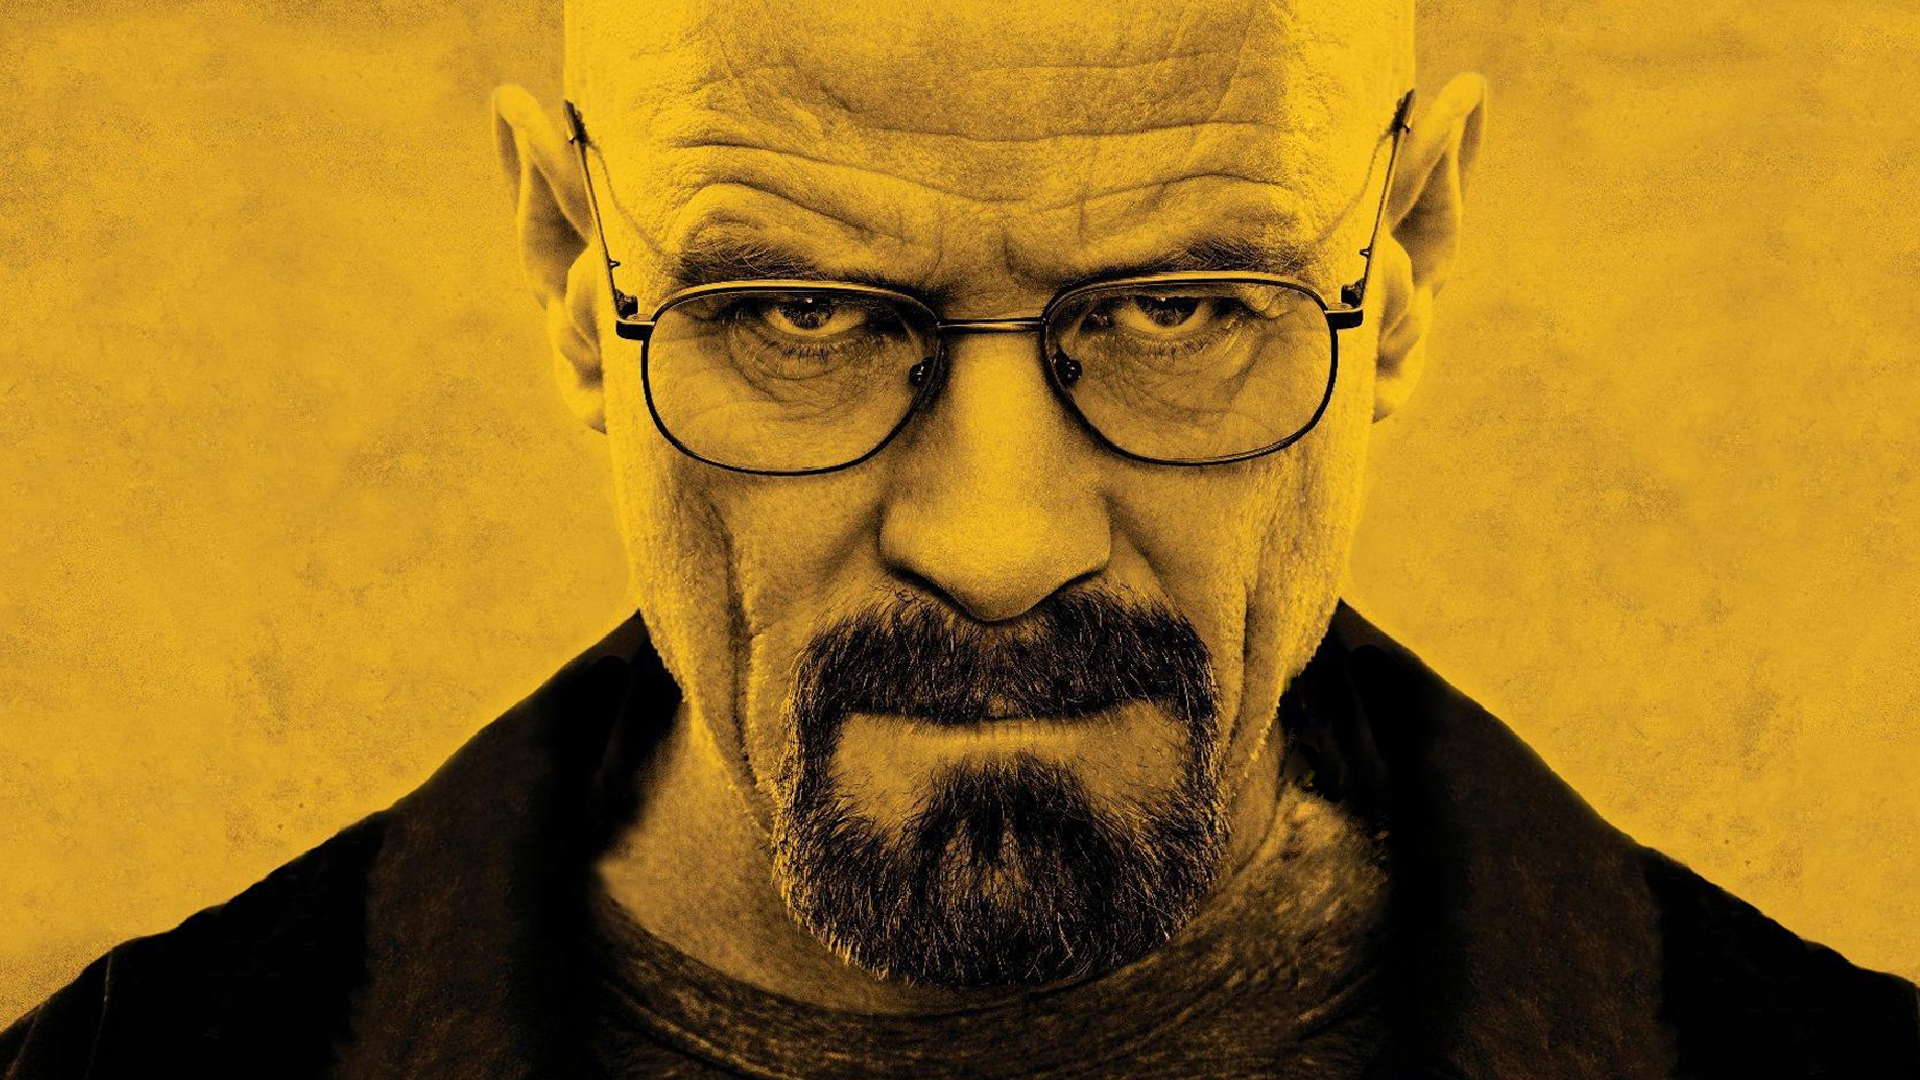 Bryan Cranston Really Wants To Play Walter White Again